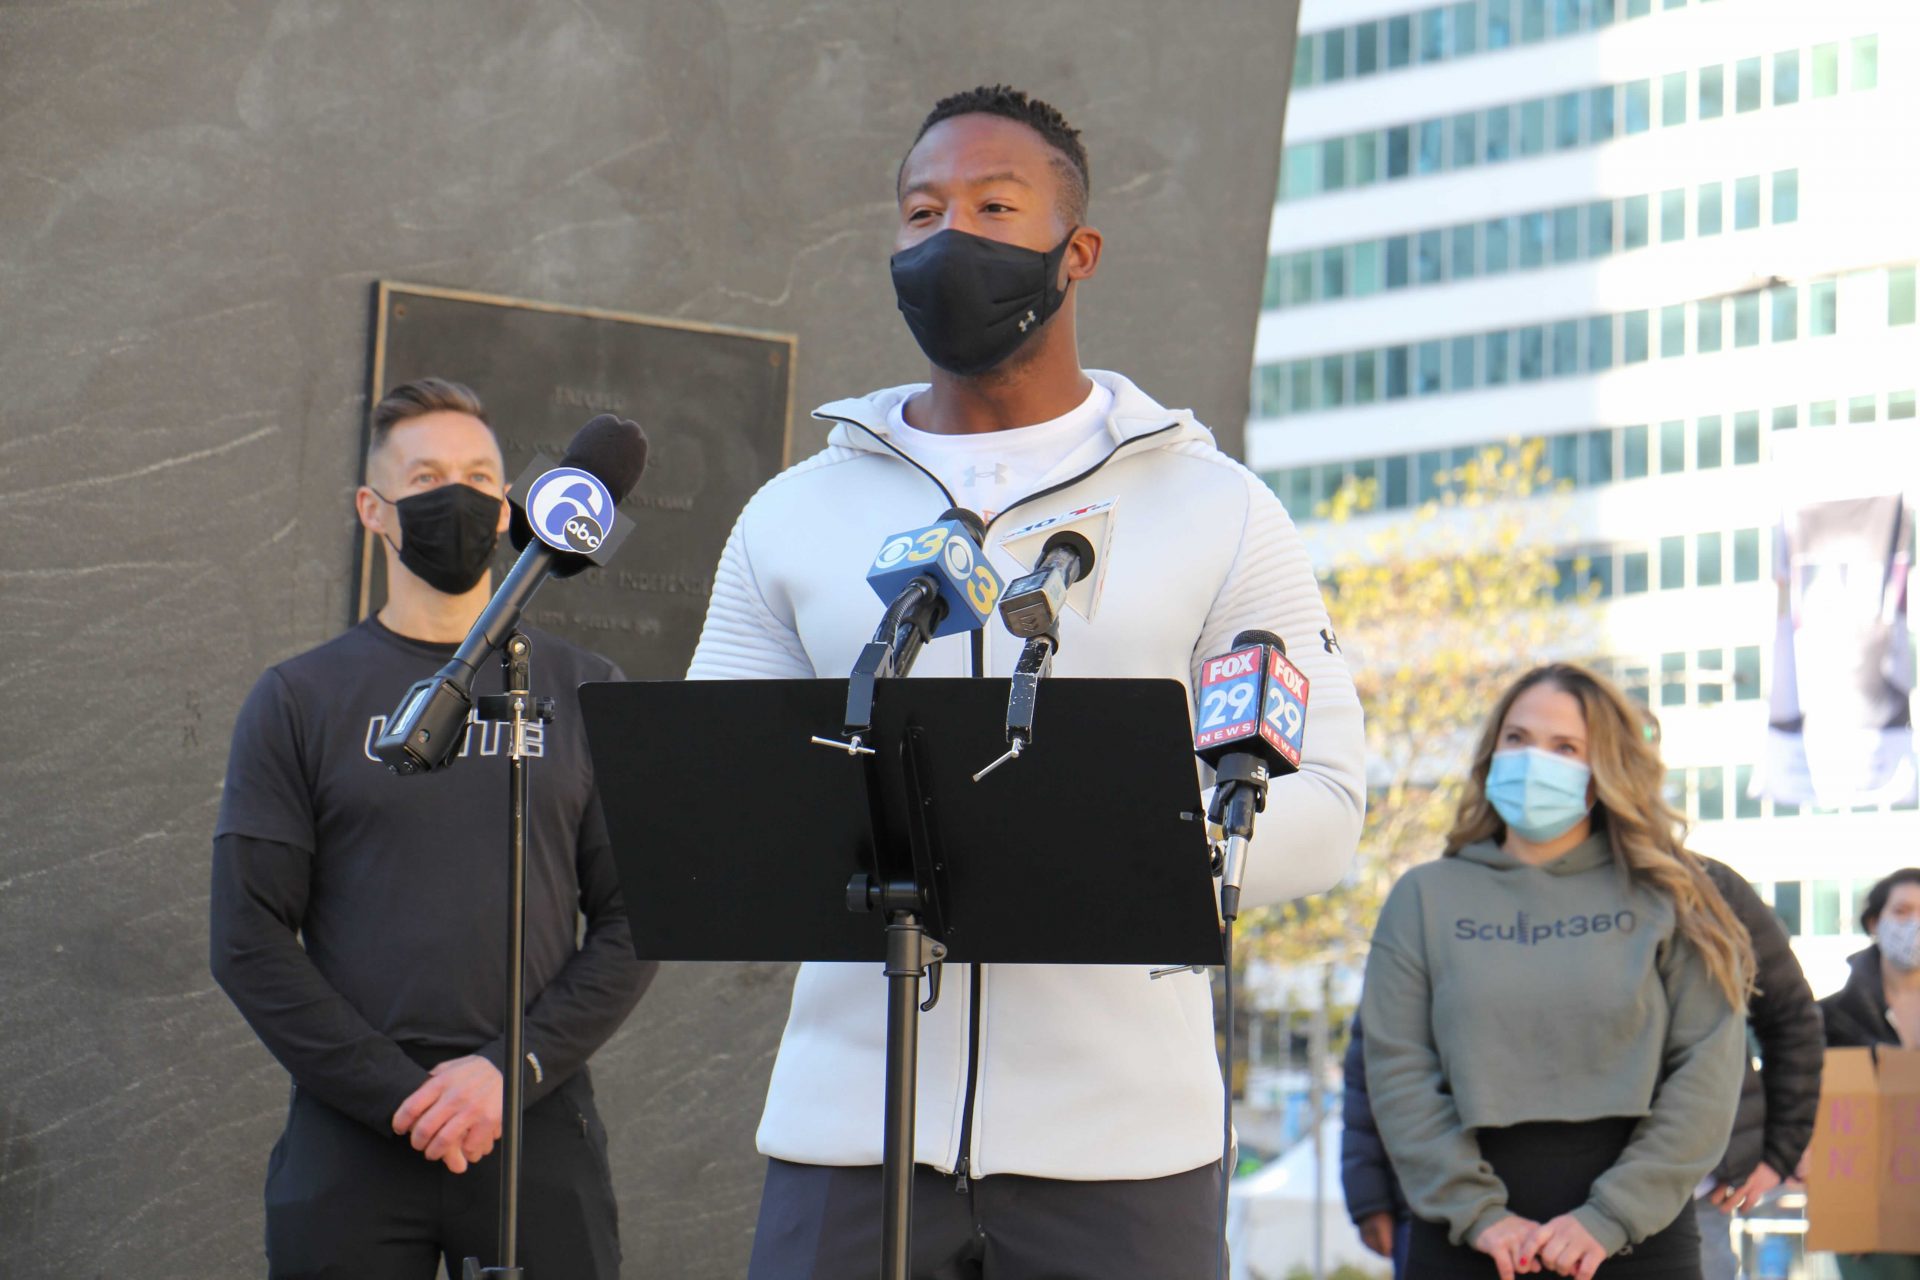 Philadelphia gym owners (from left) Gavin McKay, Osayi Osunde and Stephanie Luongo ask the city to reconsider shutting down gyms, citing their own data which they say shows their precautions against the spread of the COVID-19 are working.